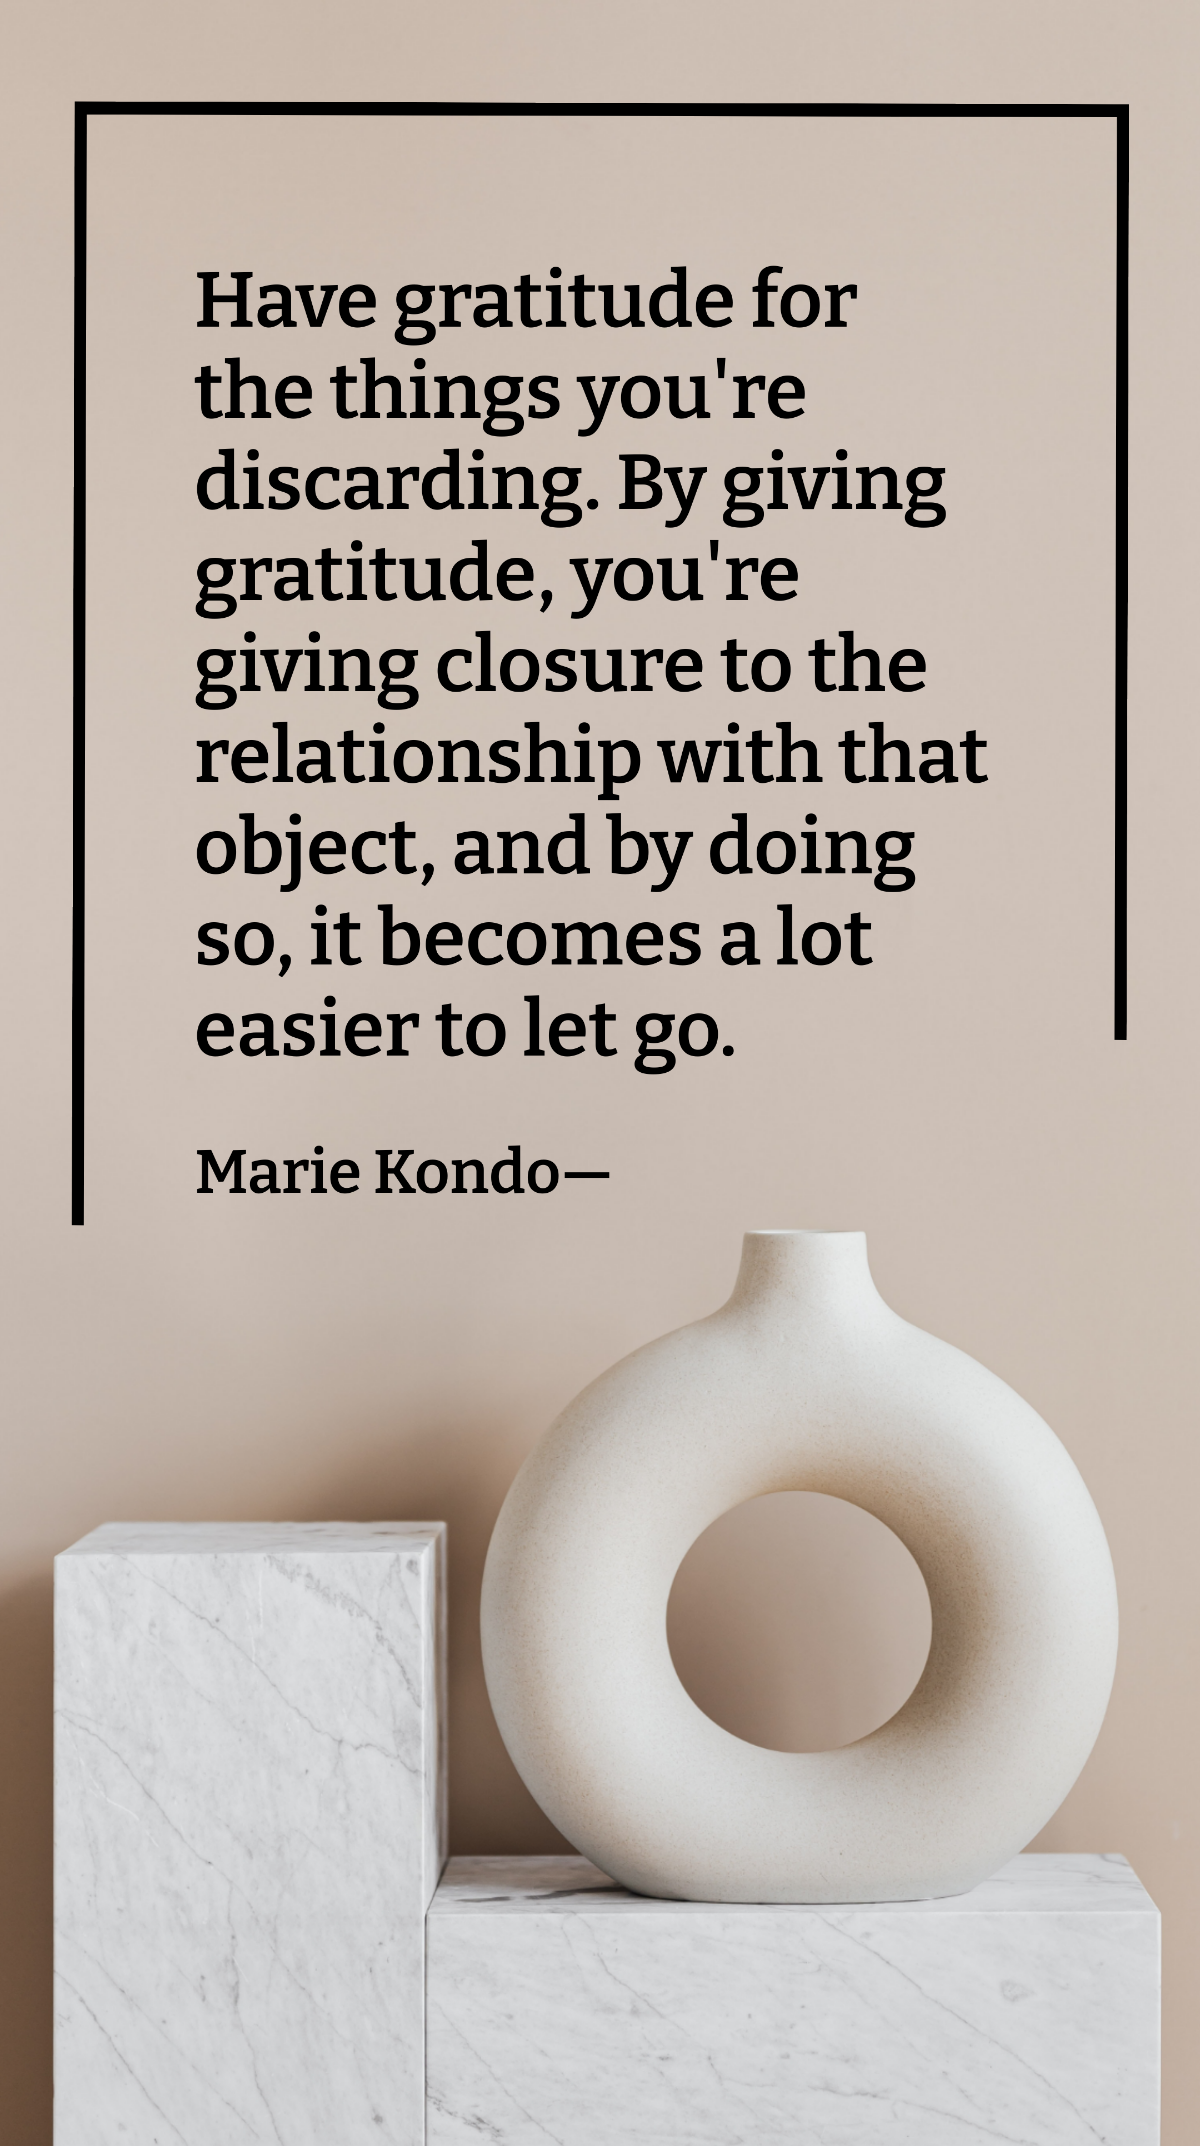 Marie Kondo - Have gratitude for the things you're discarding. By giving gratitude, you're giving closure to the relationship with that object, and by doing so, it becomes a lot easier to let go. Temp